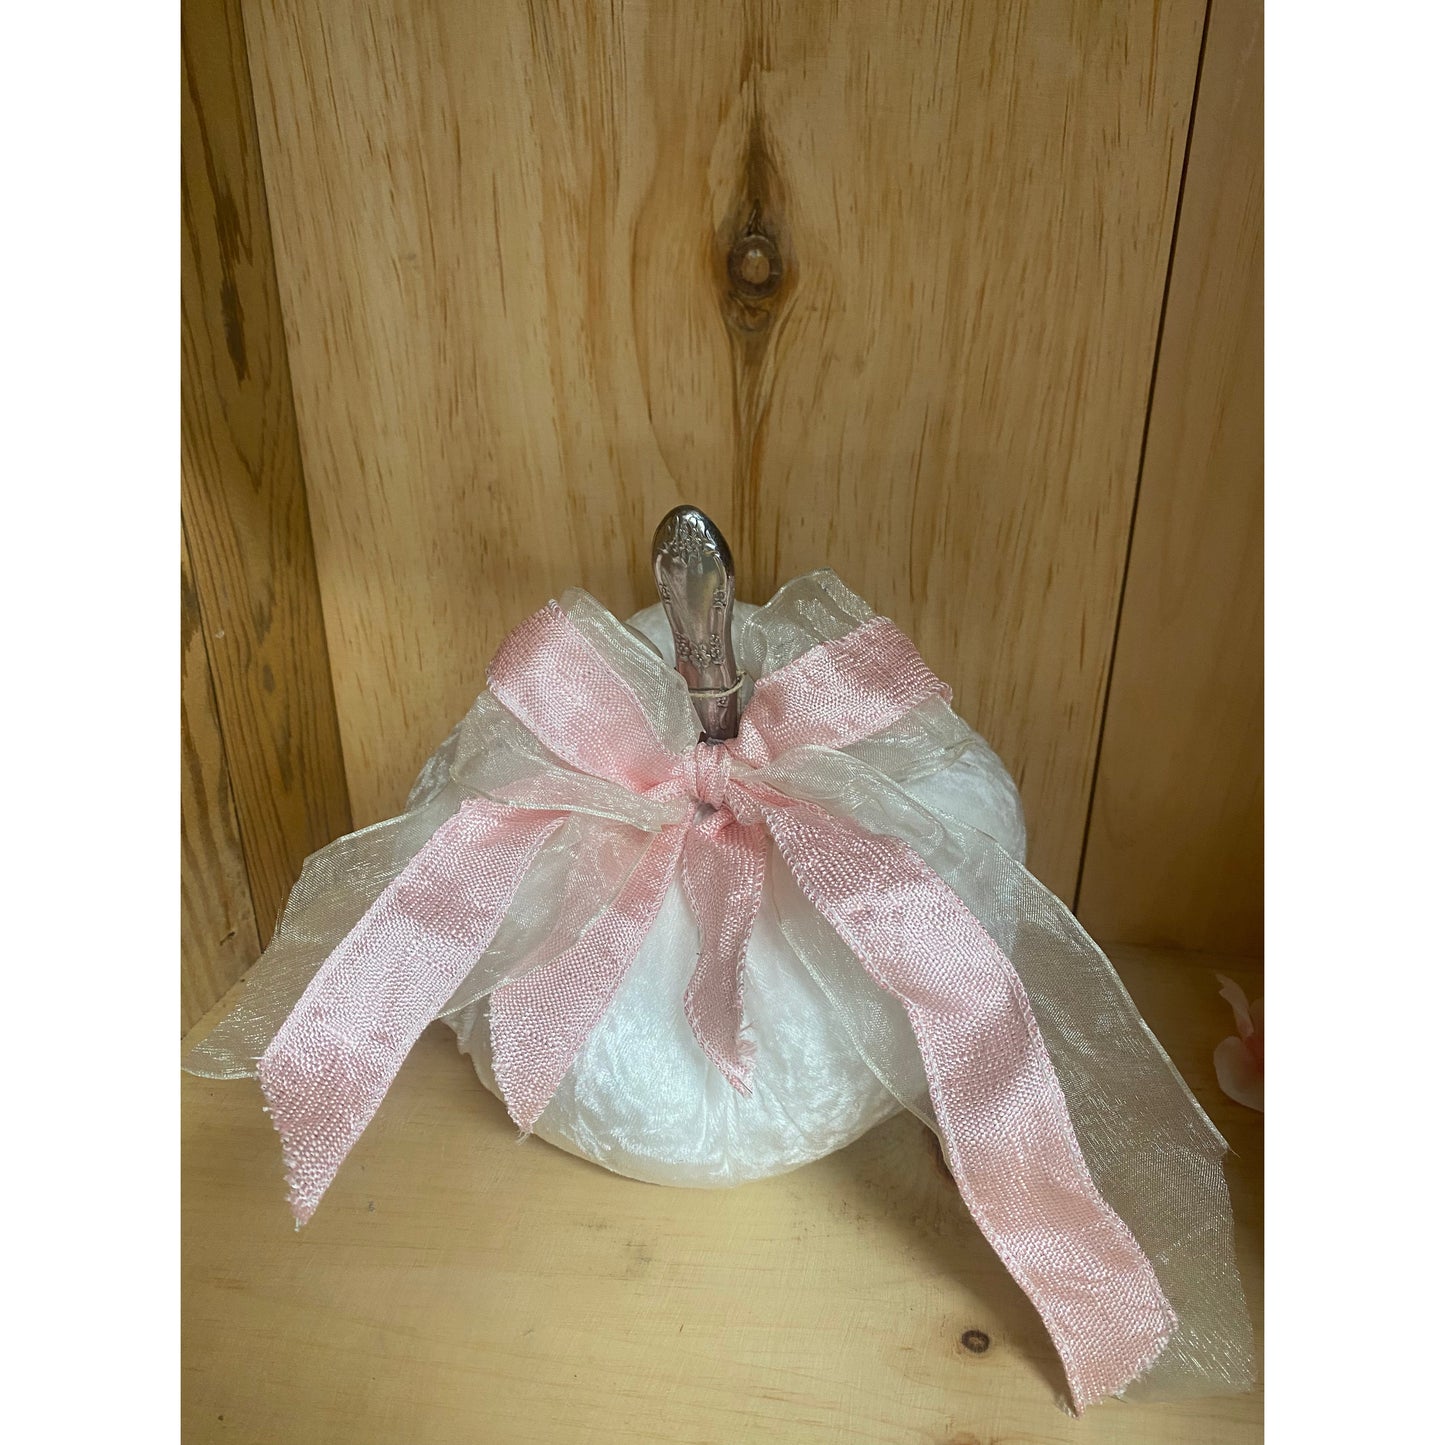 One of Kind White Velvet Pumpkin with Pink Bow Medium